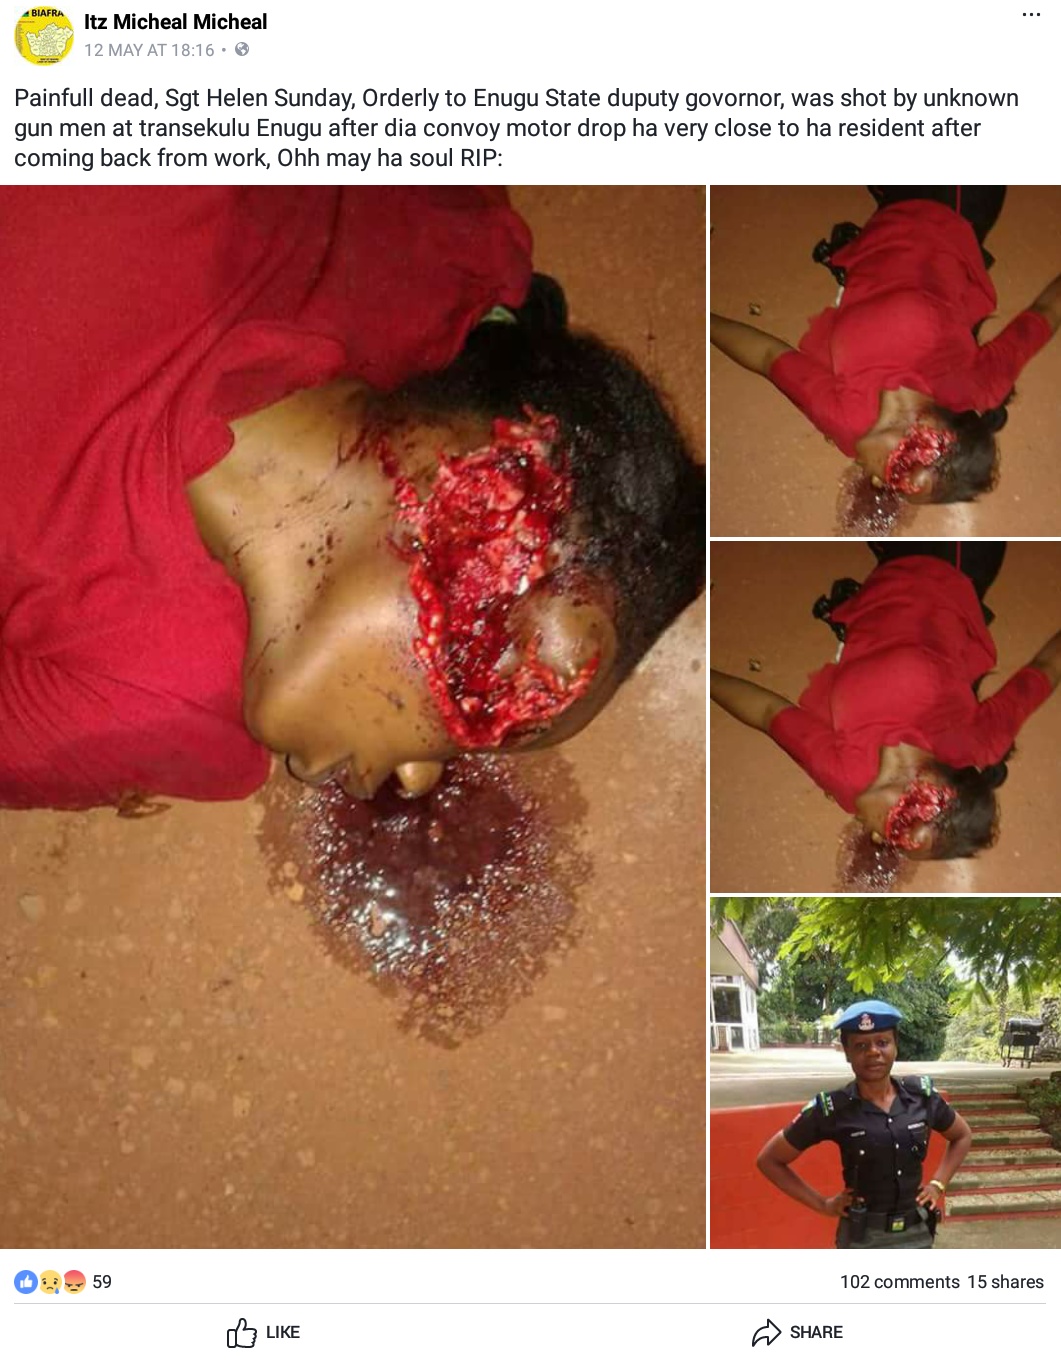 Gunmen Did To Female Orderly Attached To Enugu State Deputy Governor At Trans Ekulu